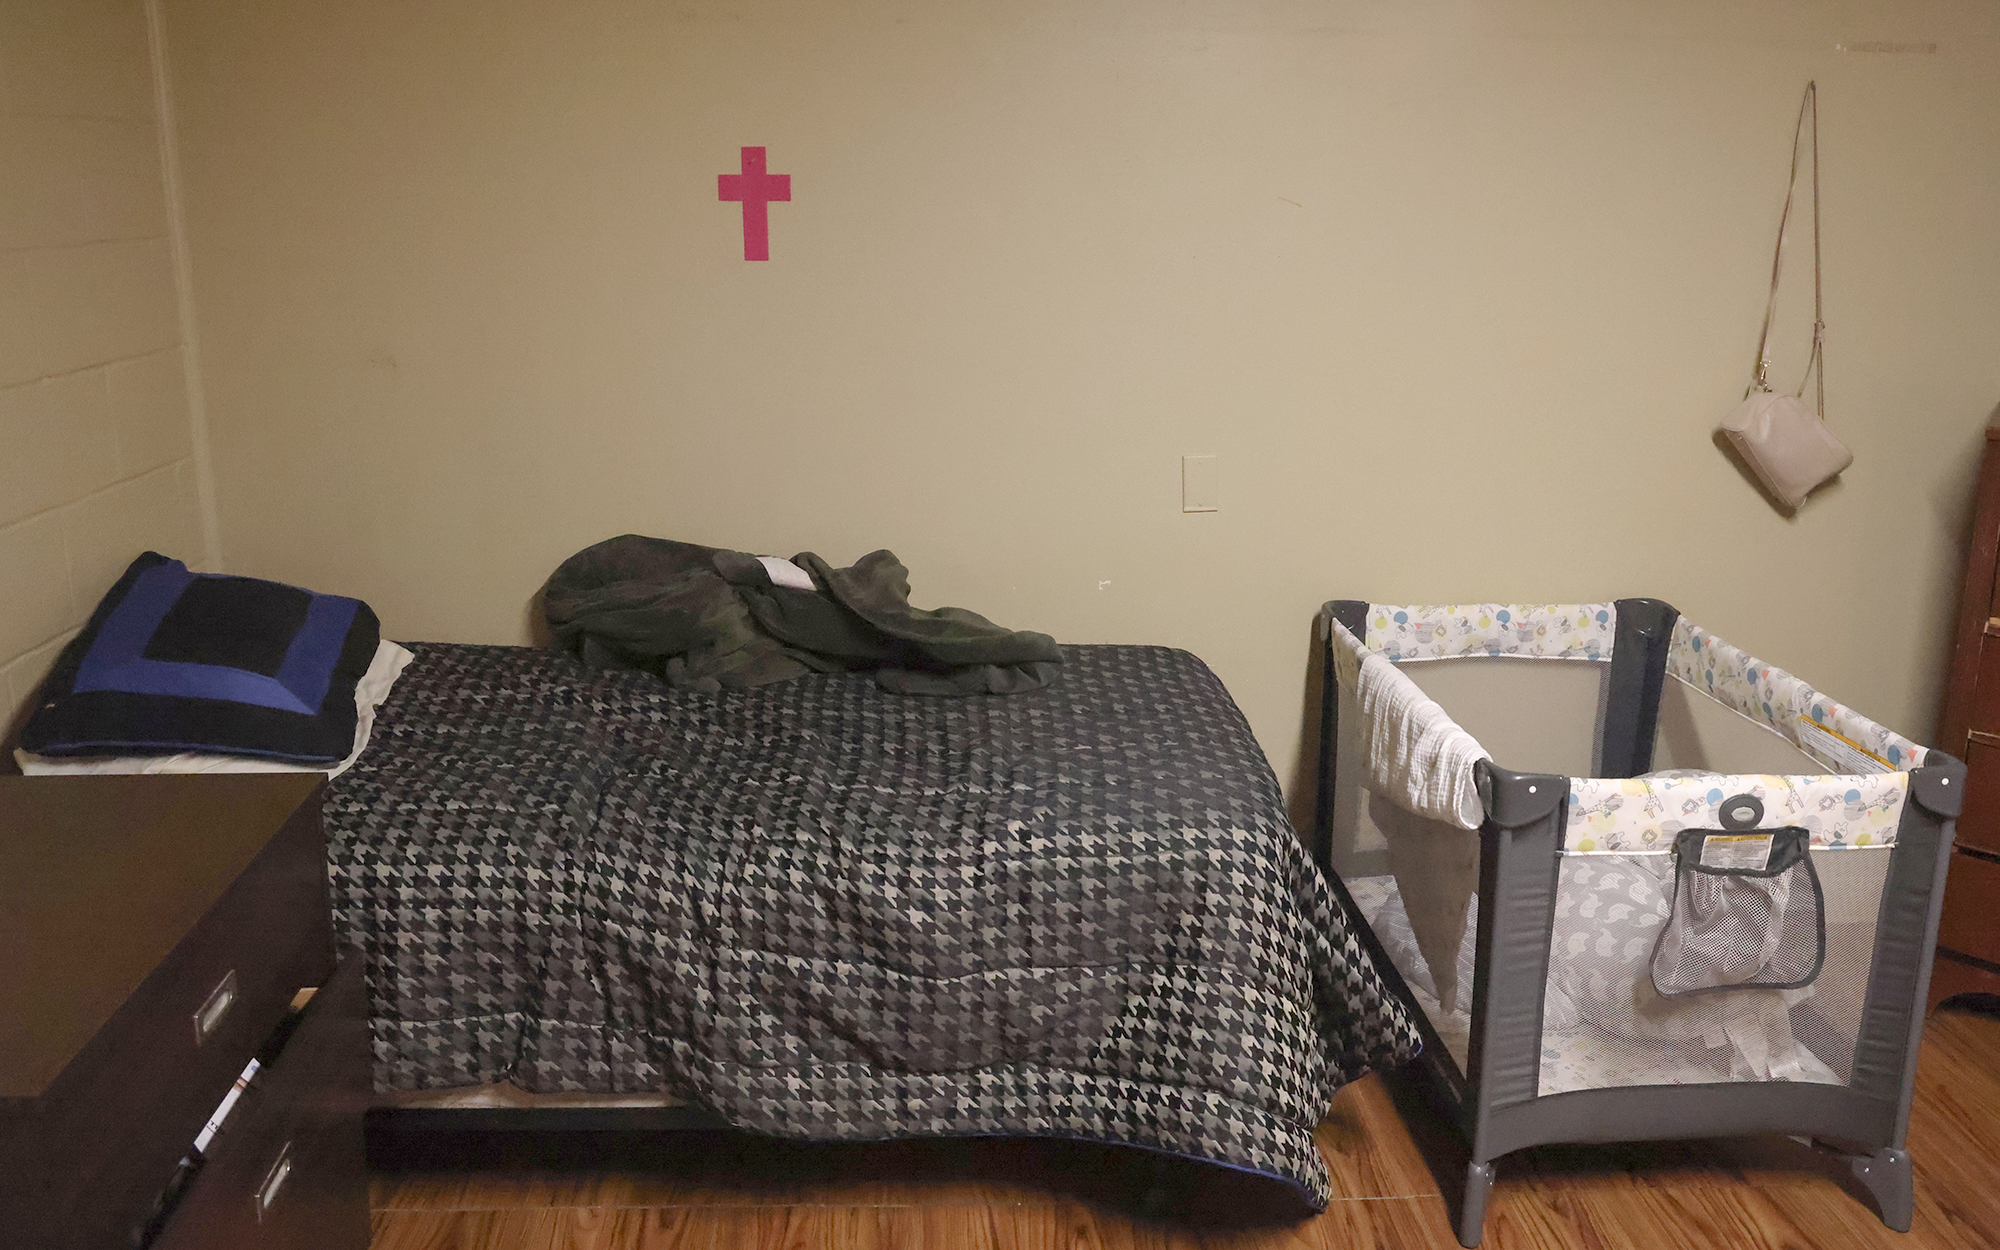 Some of the rooms at Mother’s Hope include cribs so that babies can remain close to their mothers as they go through treatment. (Photo by Shelby Rae Wills/News21)